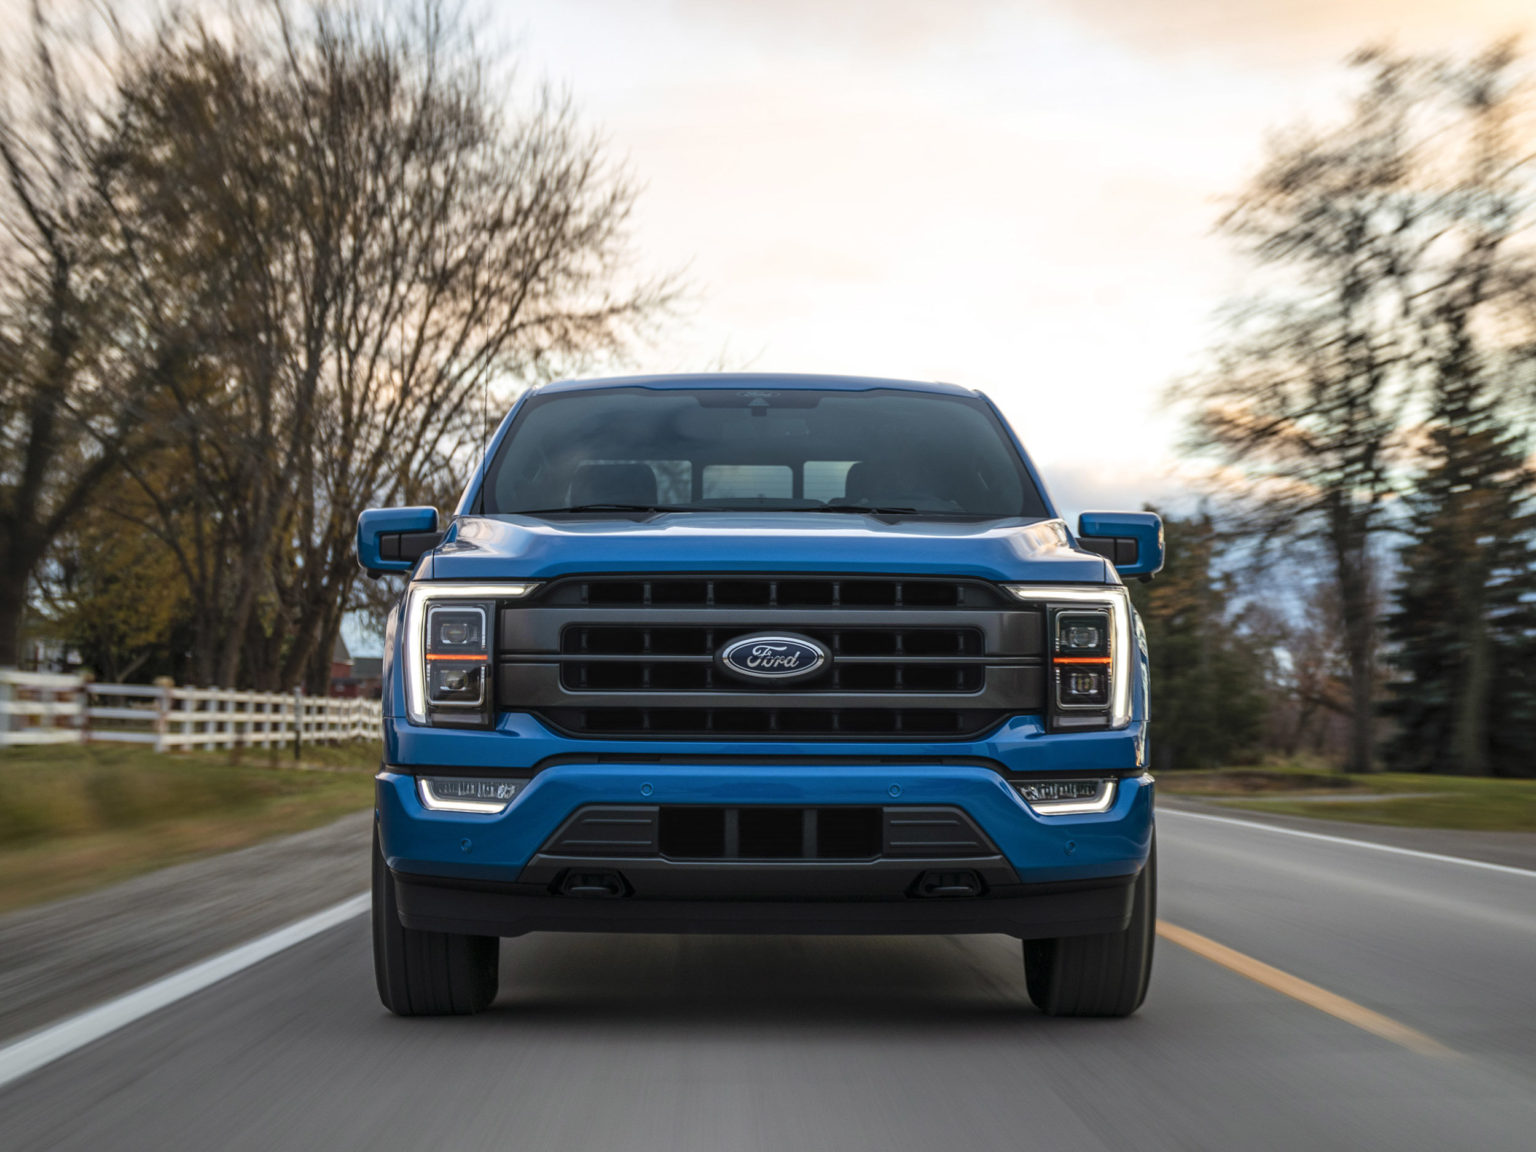 The Ford F-150 has been redesigned for the 2021 model year.